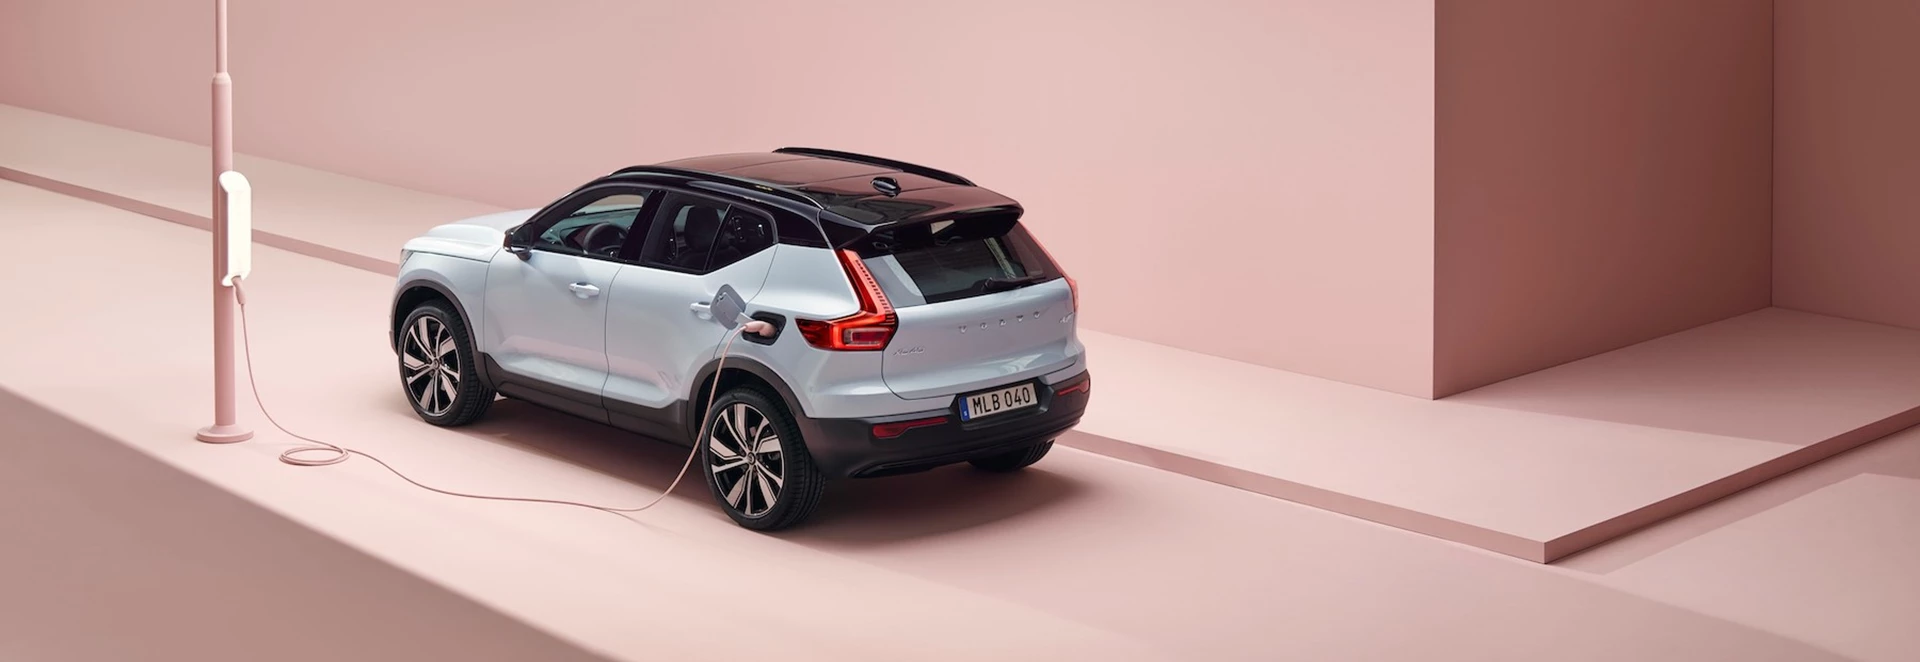 Big step towards EV future: The new all-electric Volvo XC40 Recharge